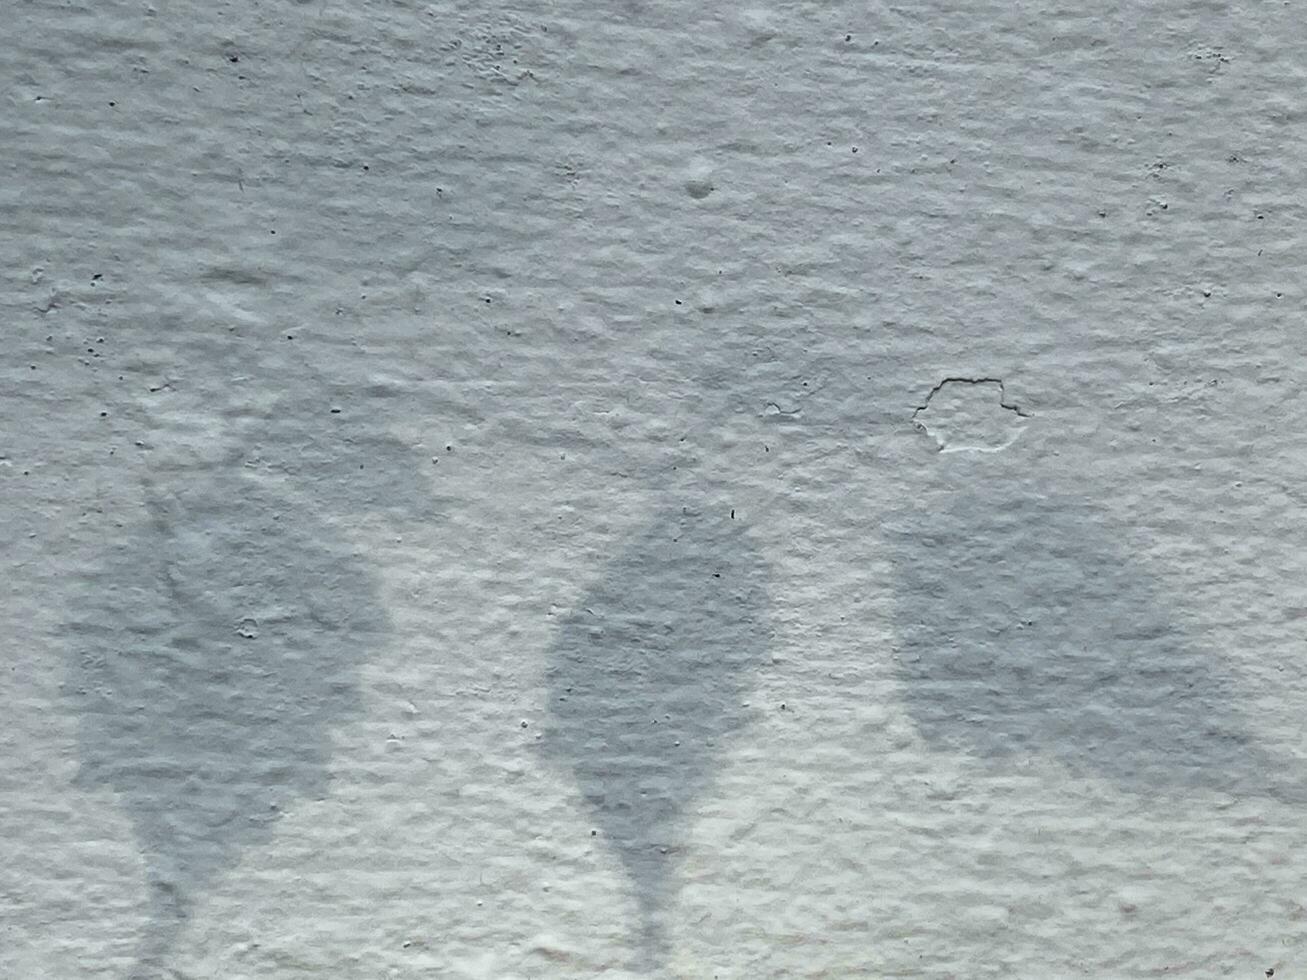 Shadow leaves on old wall background photo